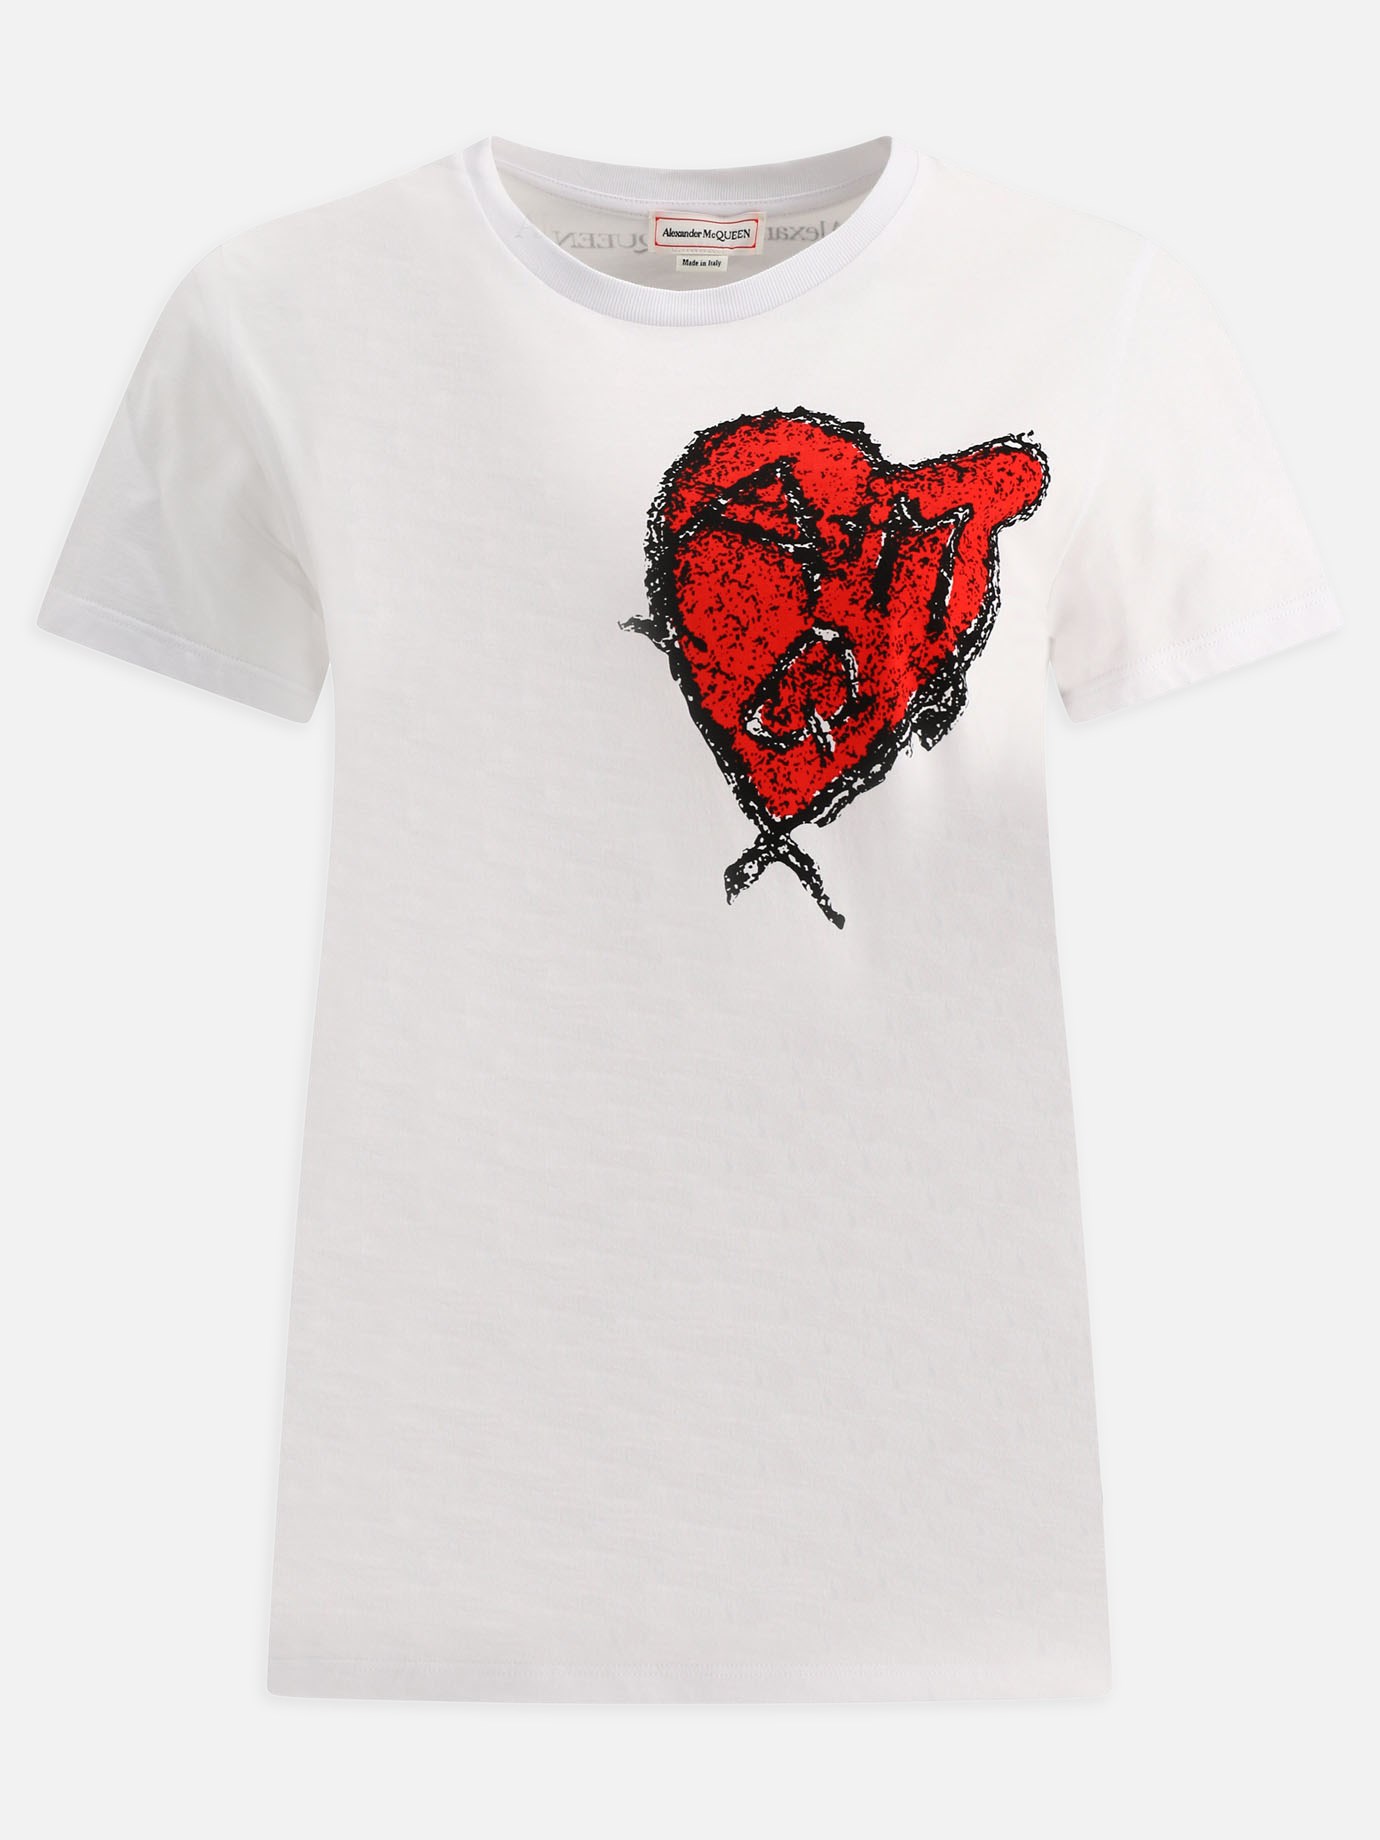  Carved Love  t-shirtby Alexander McQueen - 2